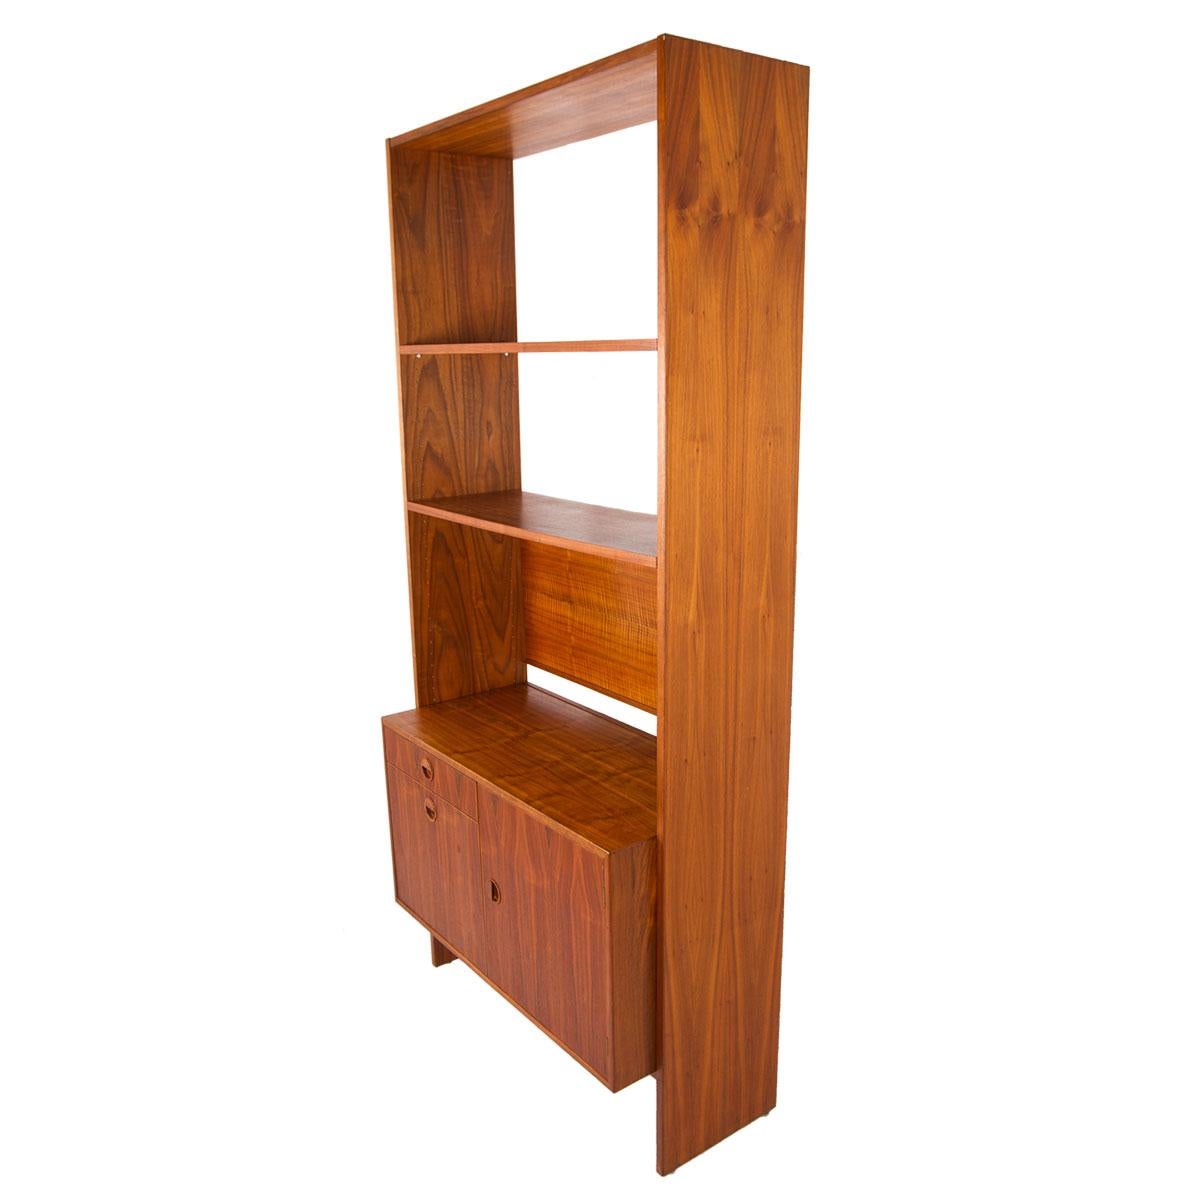 Danish Walnut Stand Alone Wall Unit / Room Divider / Bookshelf

Additional information:
Material: Walnut
Featured at DC
Gorgeous honey-toned walnut that would certainly play well w/ teak. Drawers below conceal storage w/ an adjustable shelf,